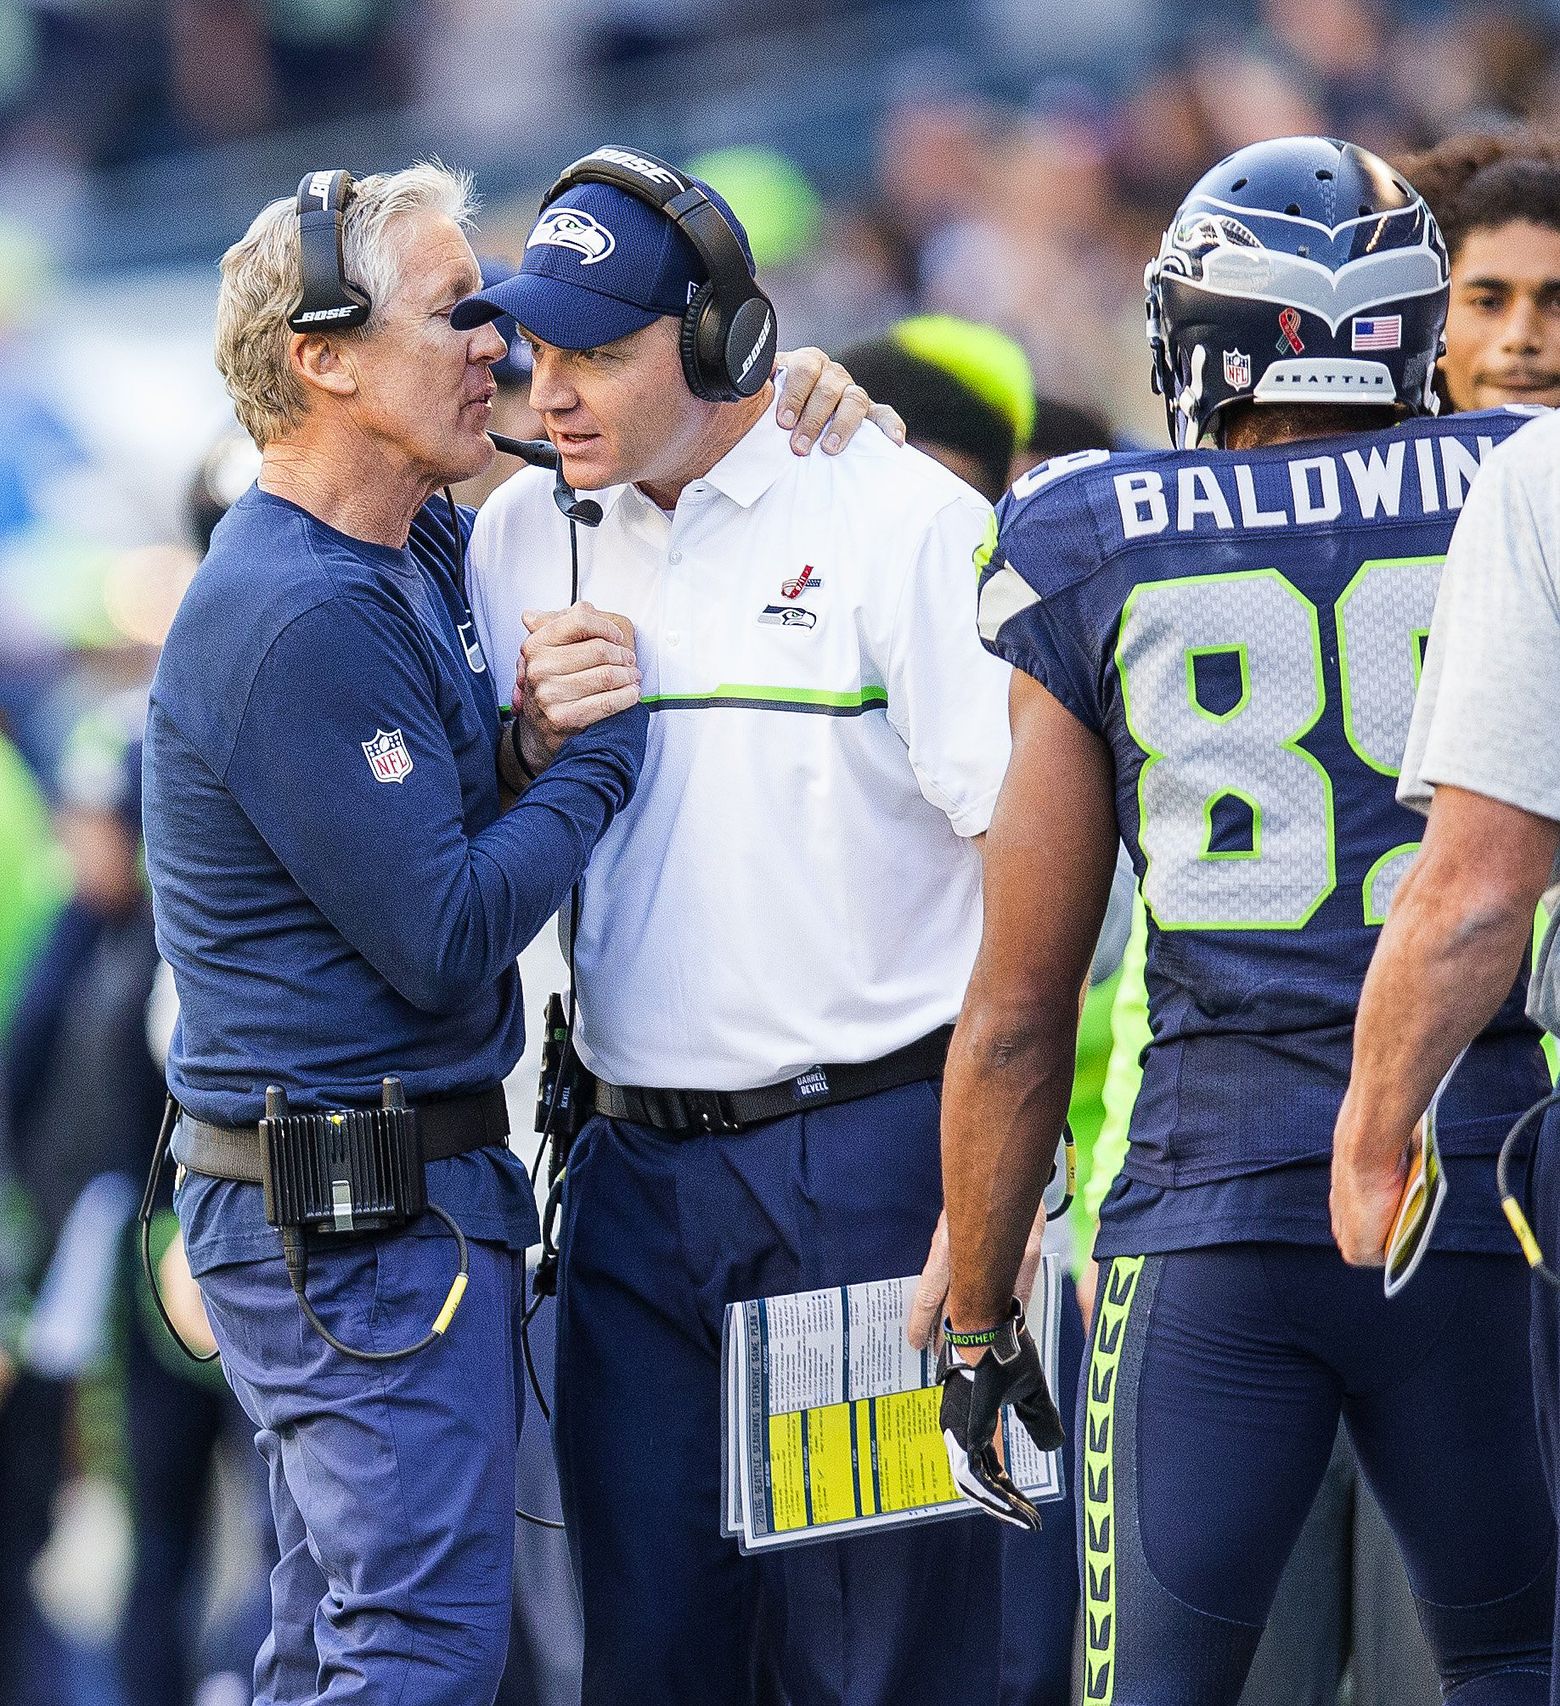 Did NFL officials dictate outcome of Rams Seahawks game?